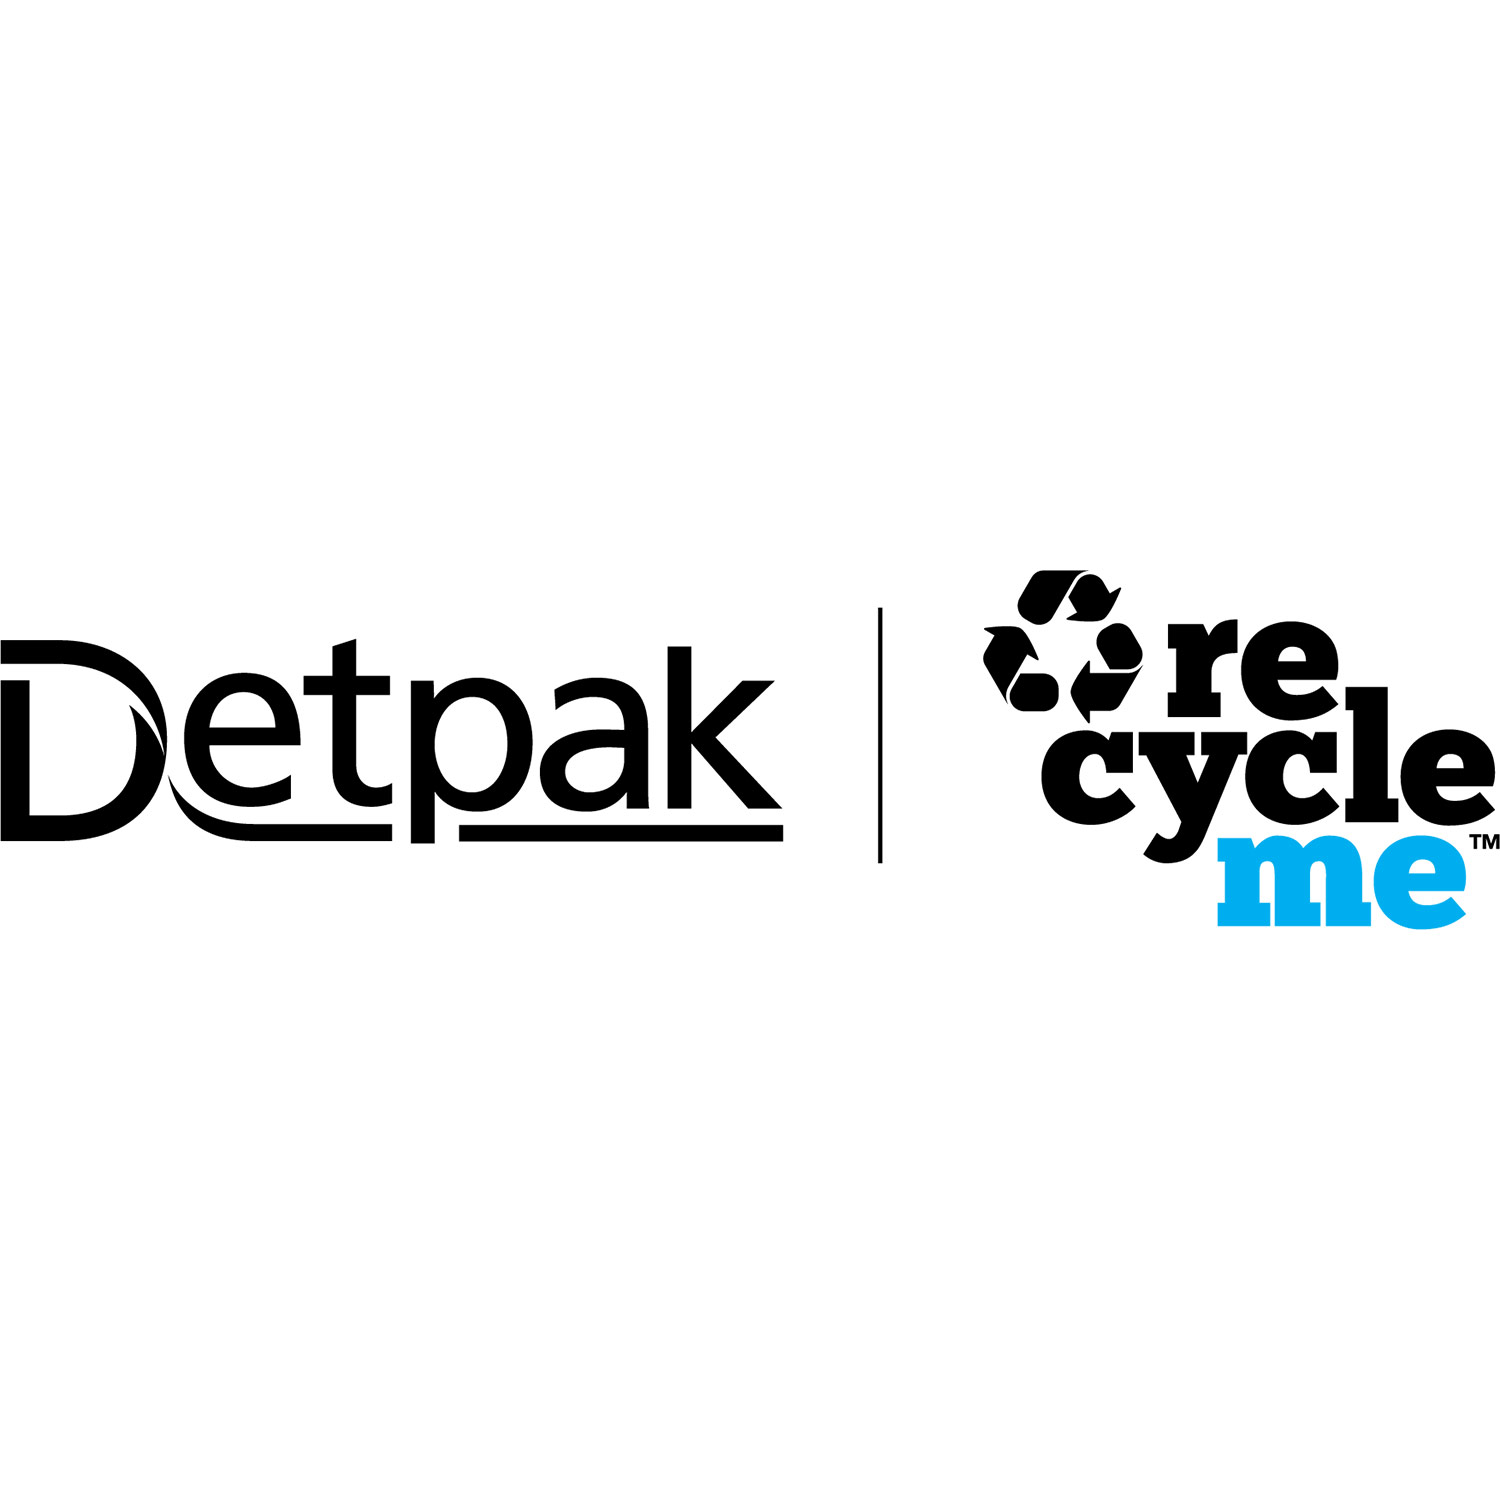 Image of Detpak and RecycleMe logos